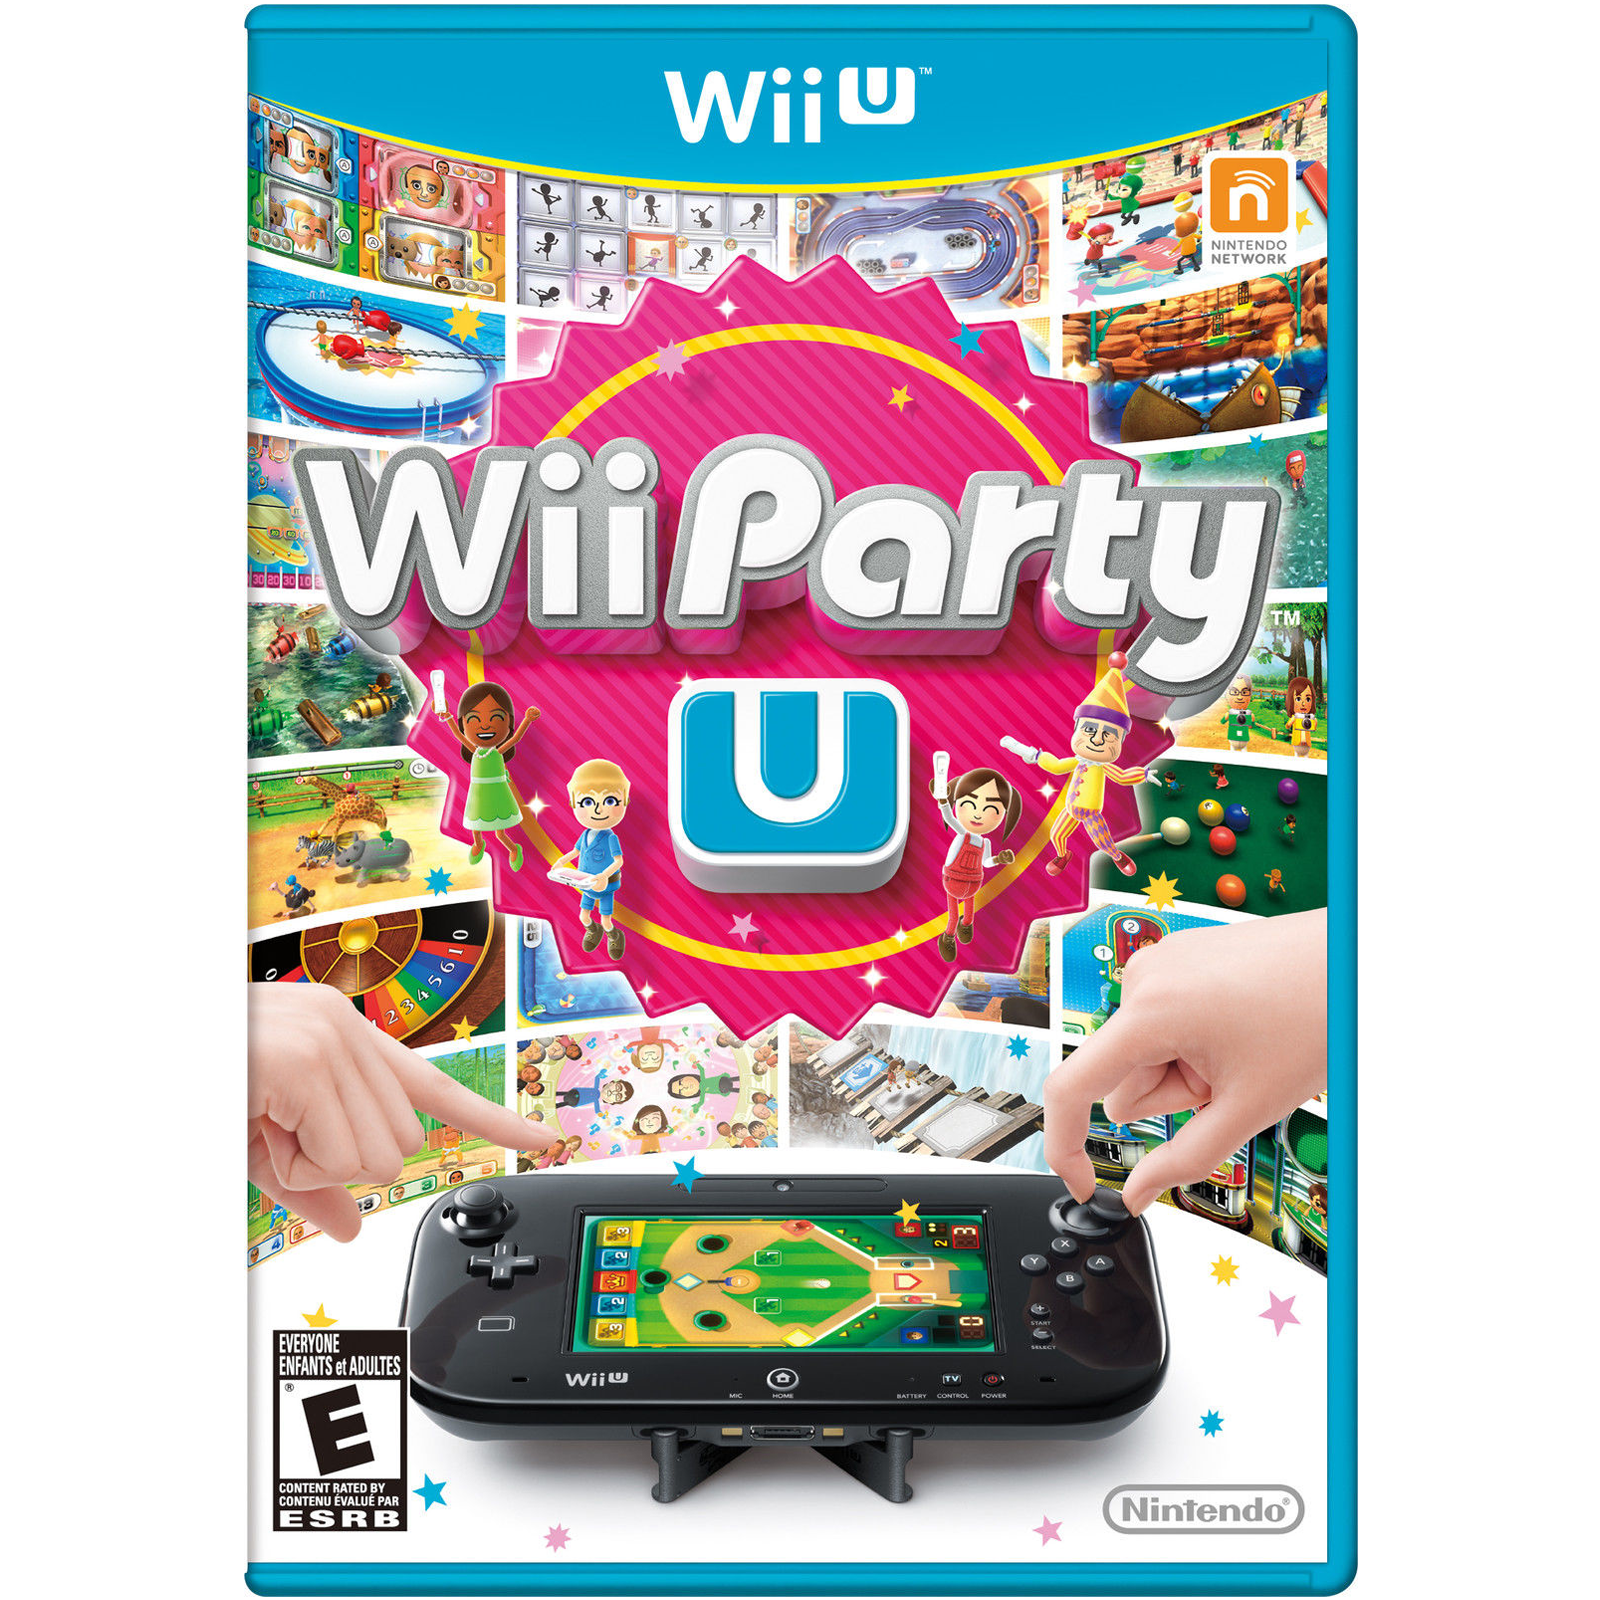 Can you download free games on wii u